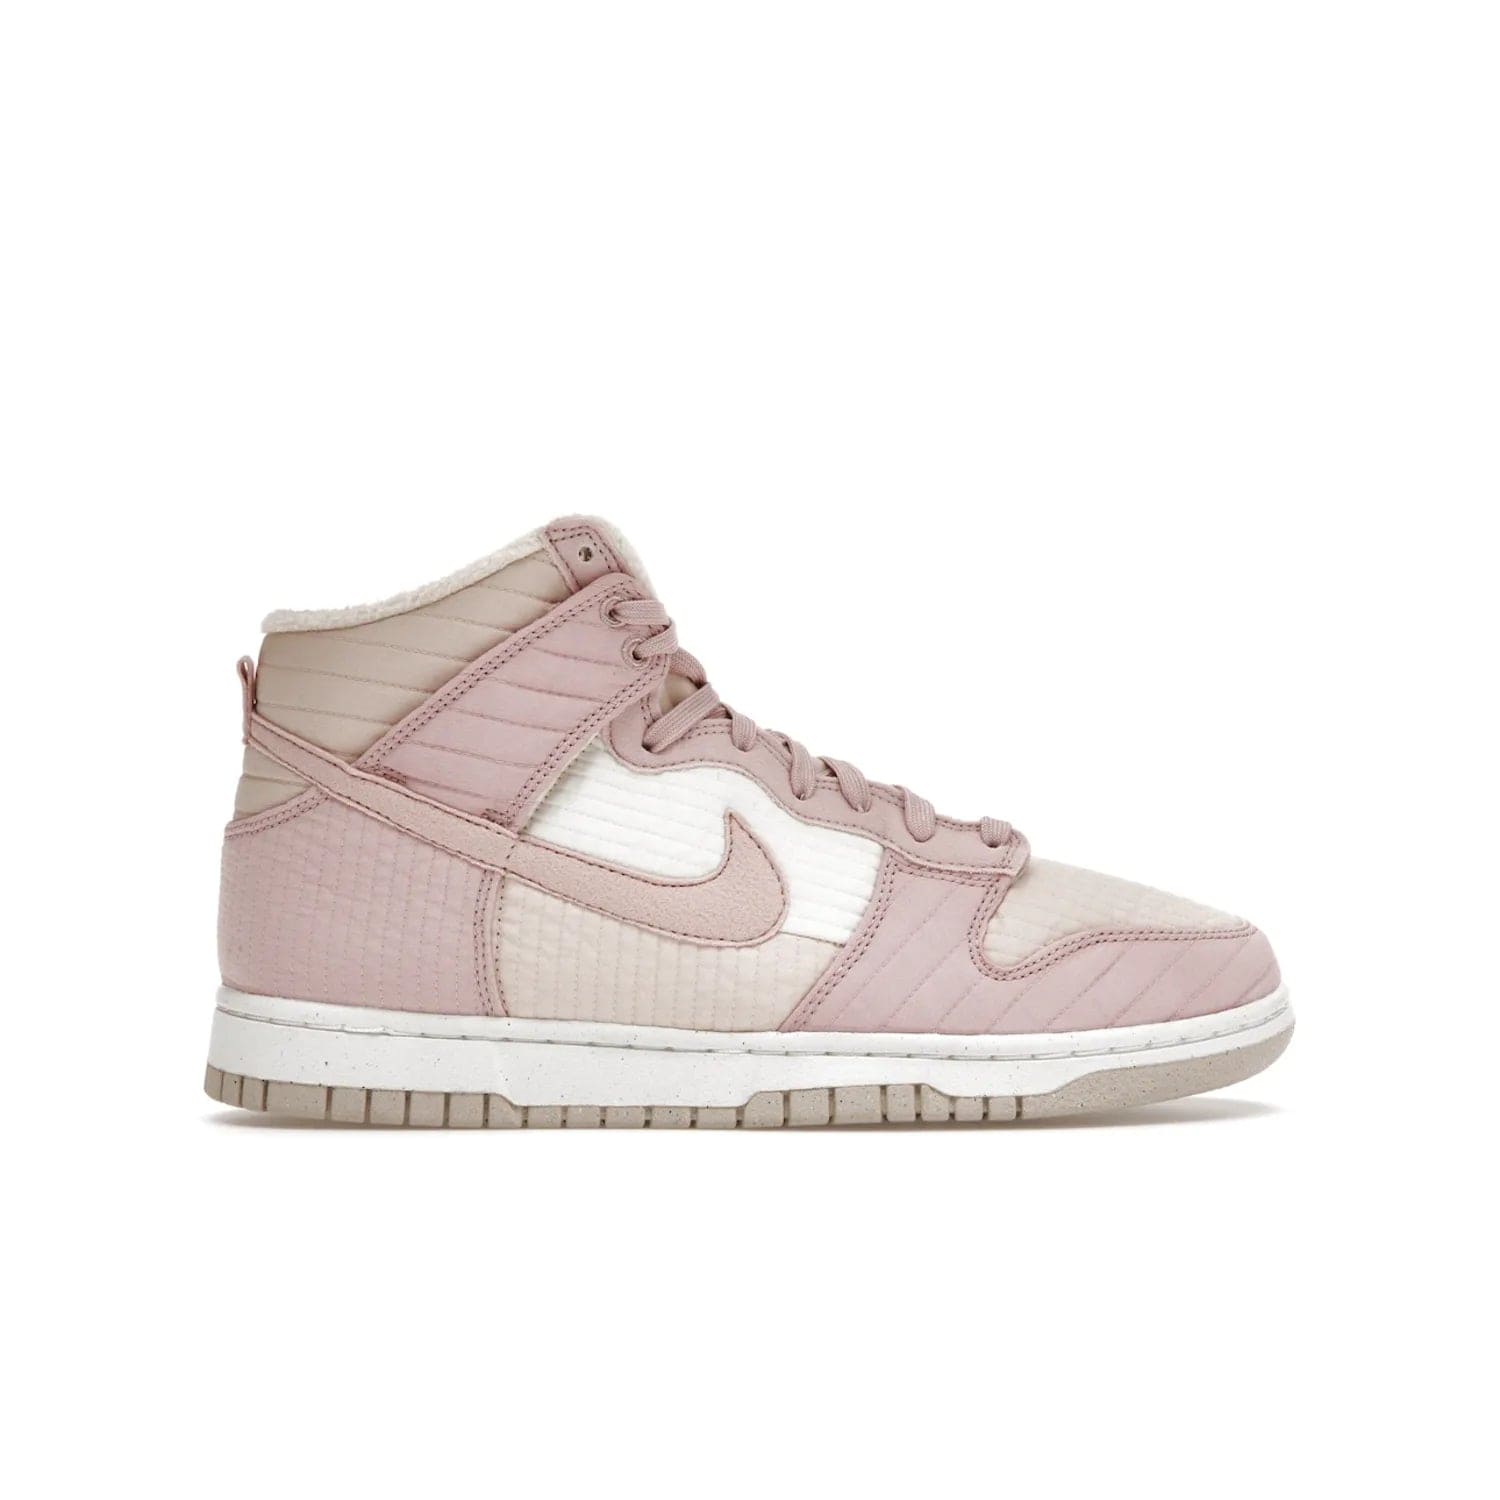 Nike Dunk High LX Next Nature Pink Oxford (Women's) - Image 1 - Only at www.BallersClubKickz.com - Cozy up in the Nike Dunk High LX Next Nature Pink Oxford for Women. Quilted upper, white midsole, soft fleece interior provide warmth and comfort for cold winter nights.